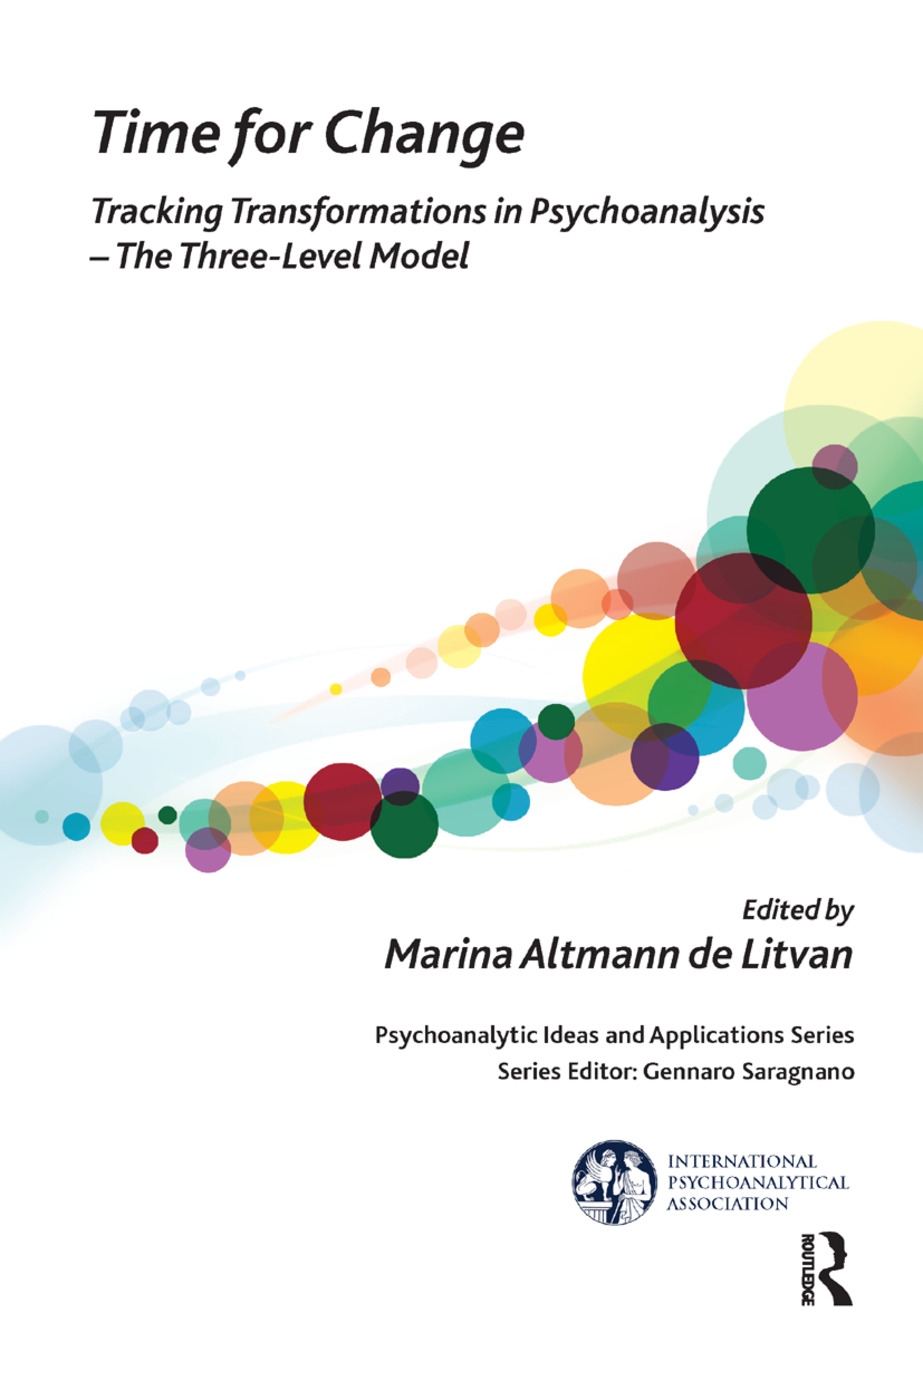 Time for Change: Tracking Transformations in Psychoanalysis - The Three-Level Model